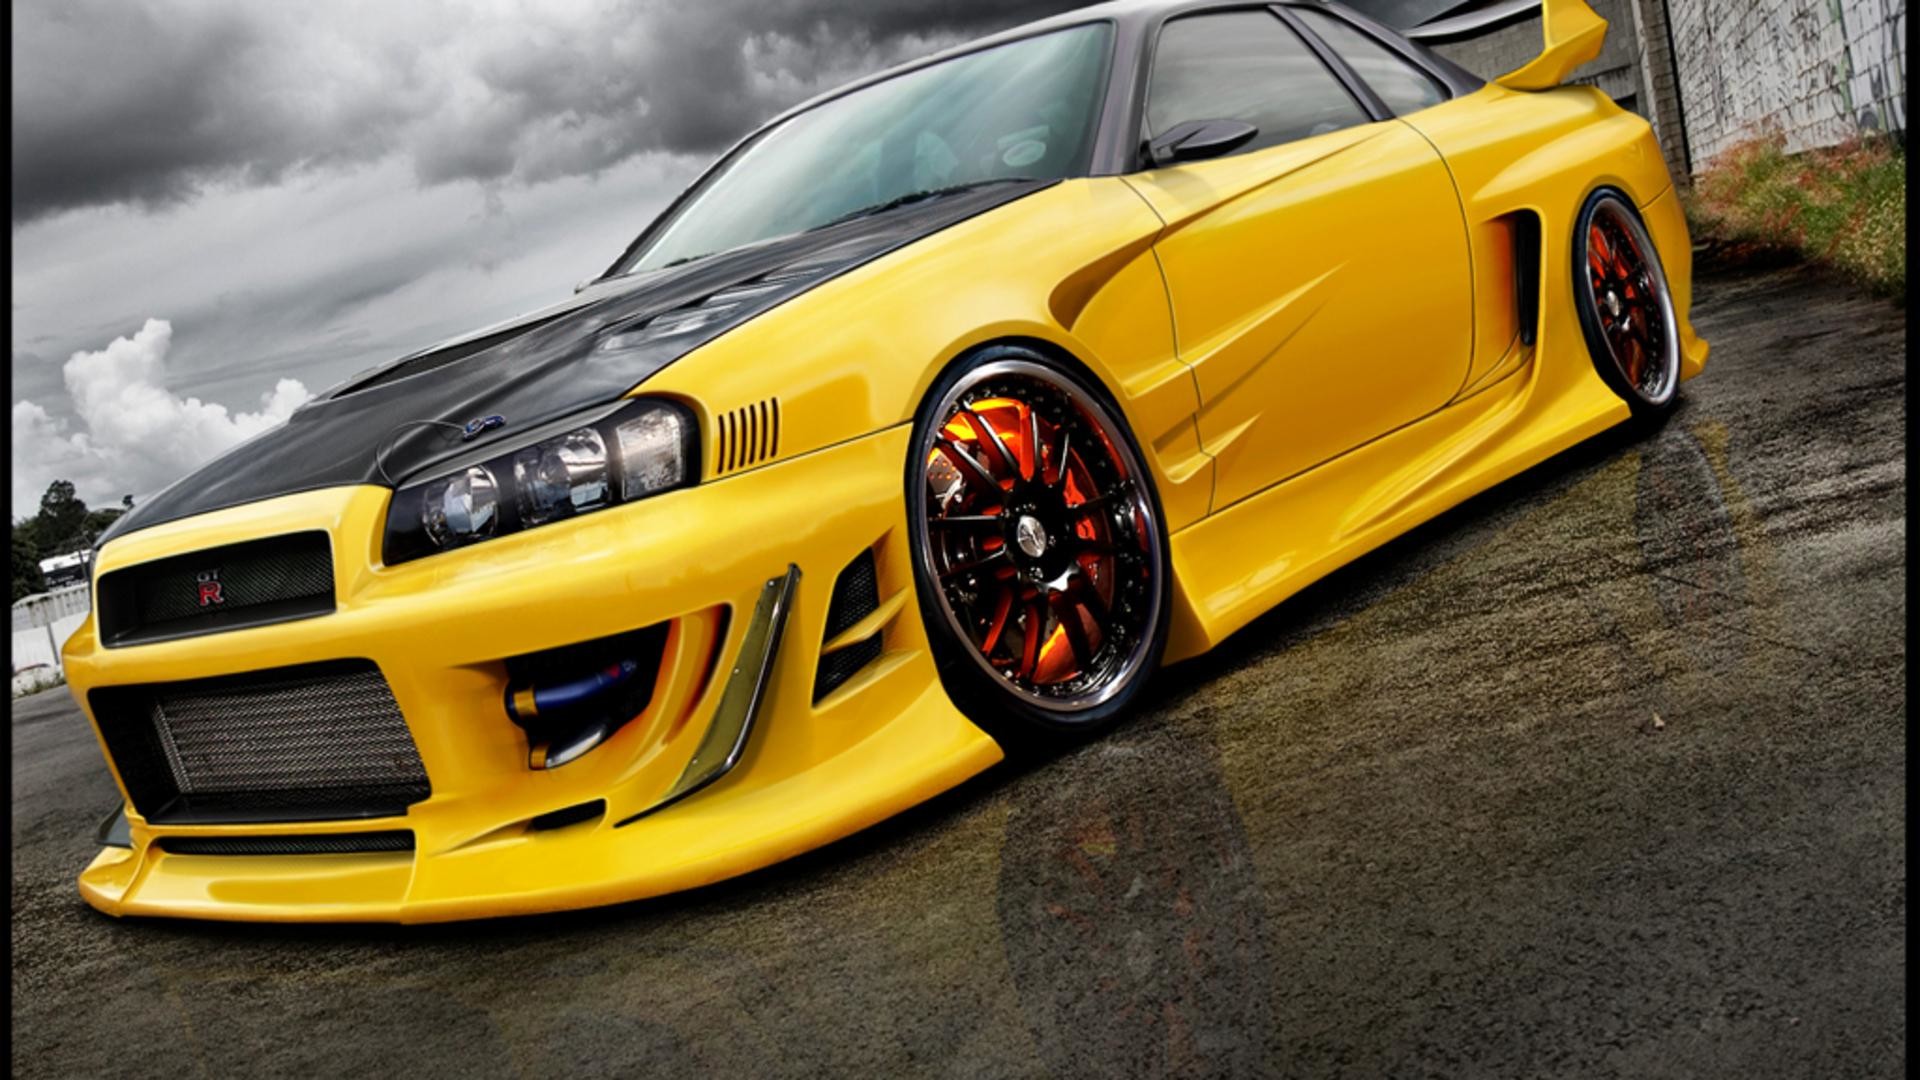 1920x1080 #720x1280 #Wallpaper #nissan, #skyline, #gt-r, #r34, #nismo, #s-tune  #mobile_background #mobile #background #samsung #Note2 | Mobile Background  | Pinterest ...